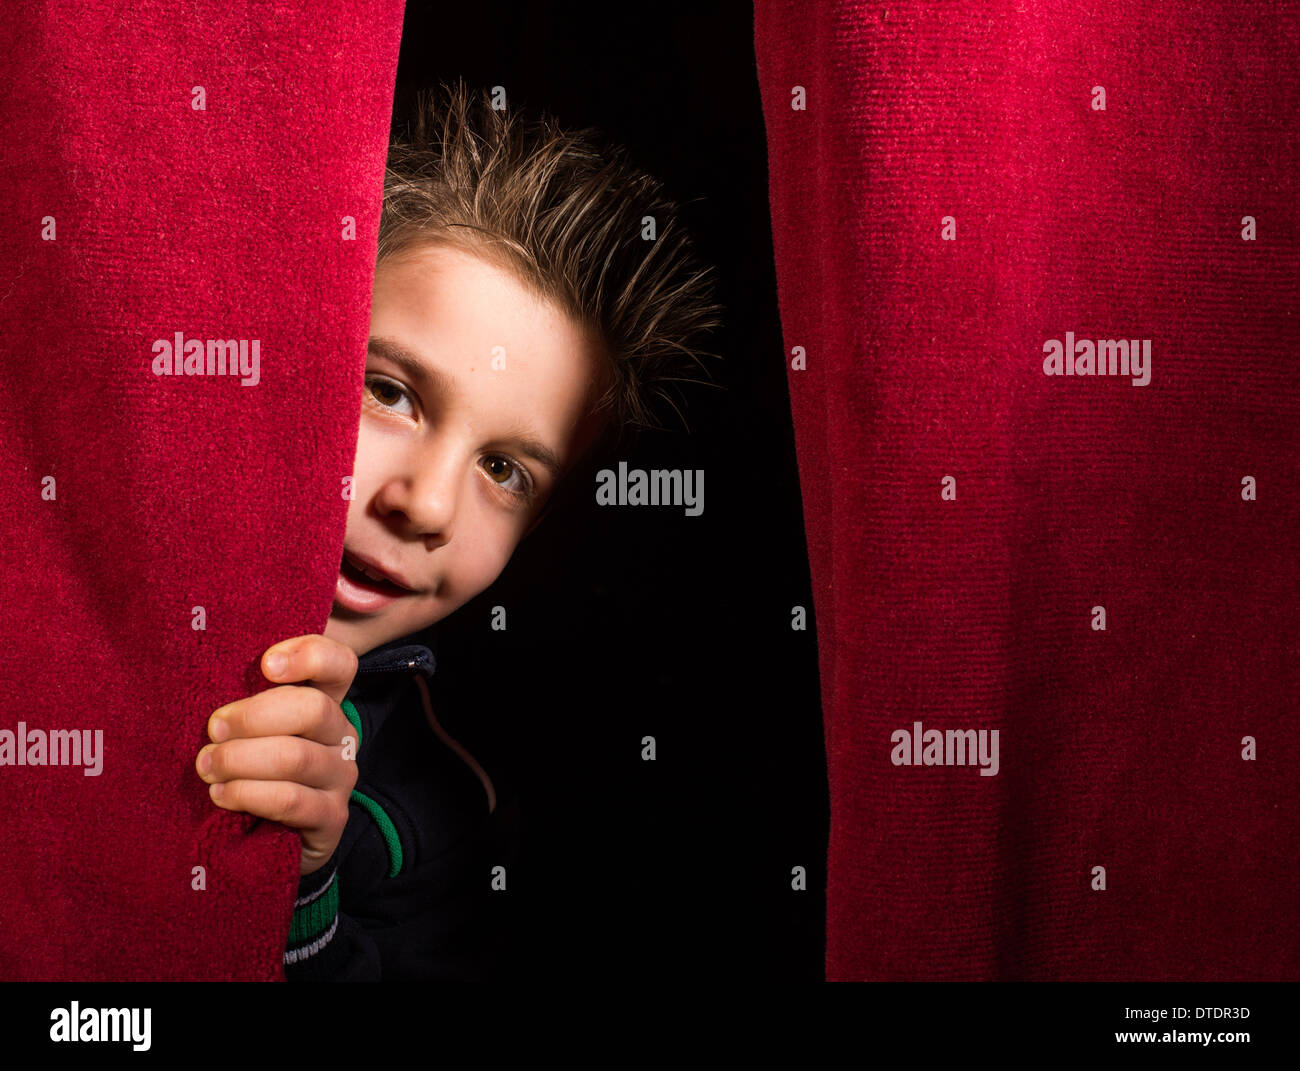 Child appearing beneath the curtain. Red curtain. Stock Photo